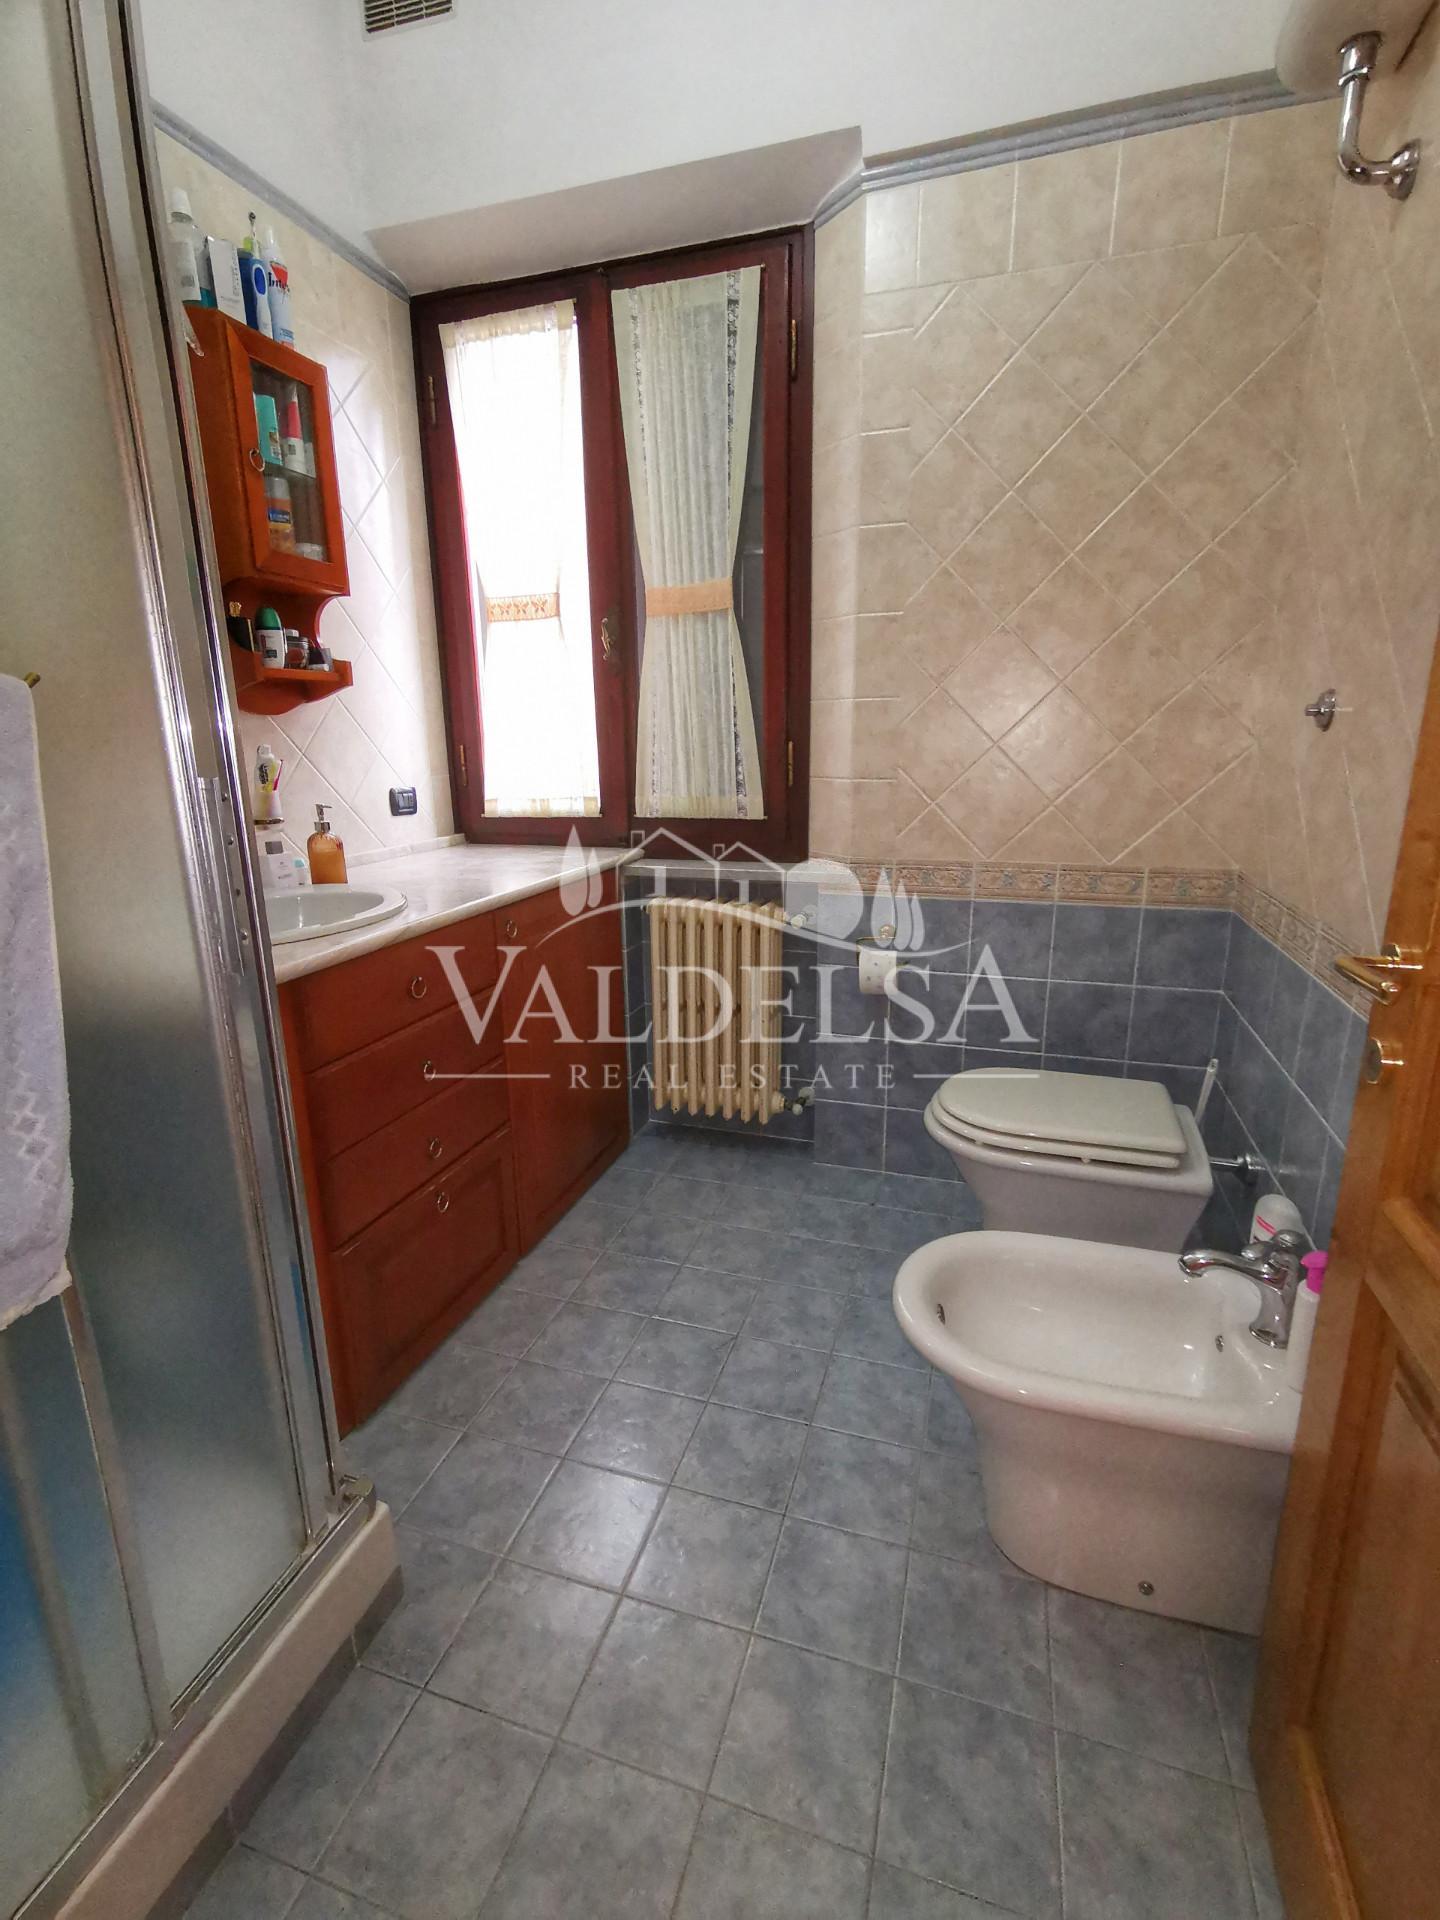 Semi-detached house for sale, ref. 721